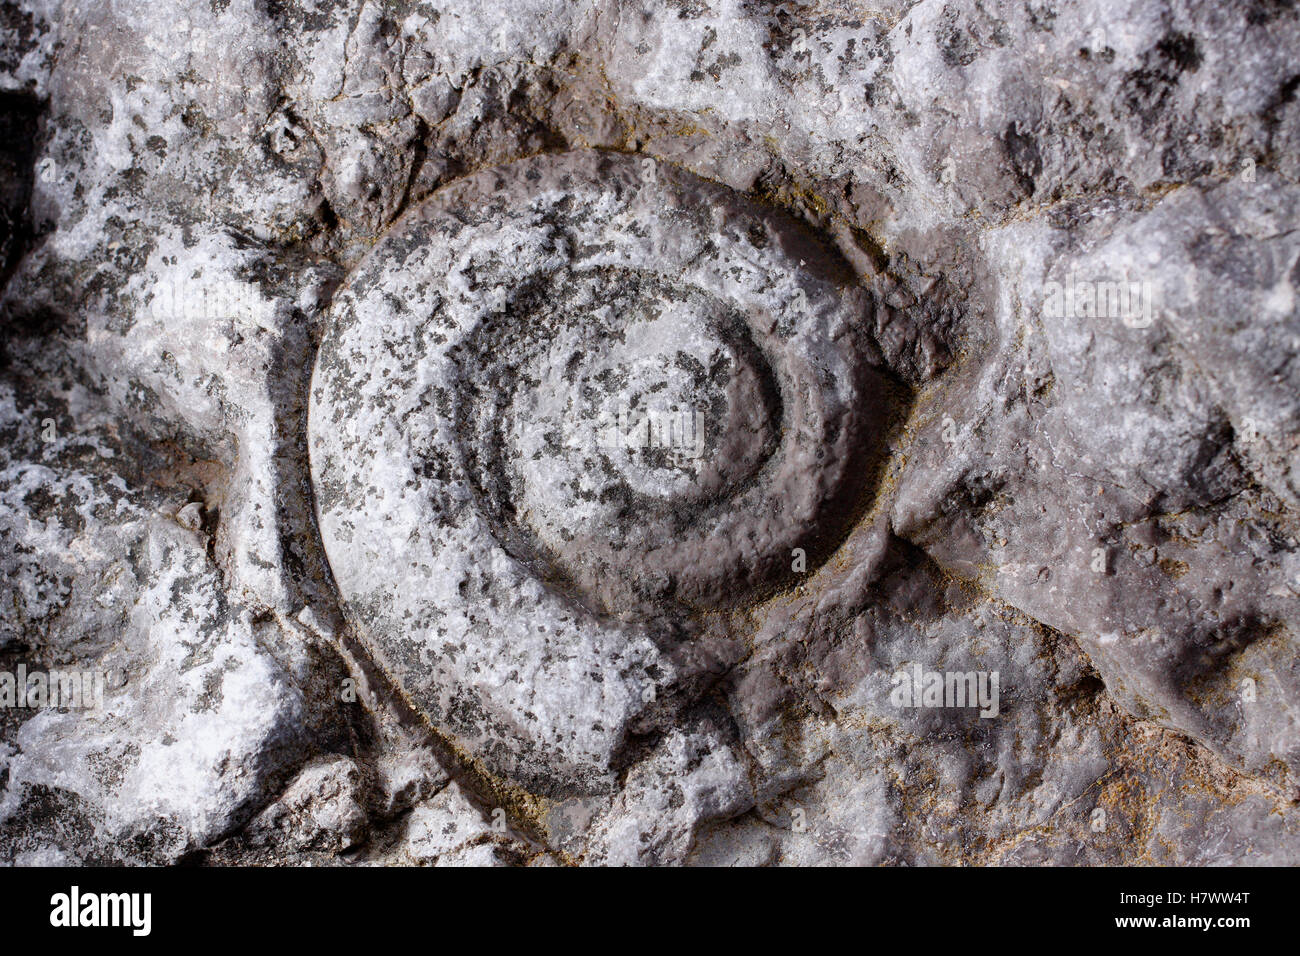 Nautilus fossil, Table Point Ecological Reserve, Canada Stock Photo